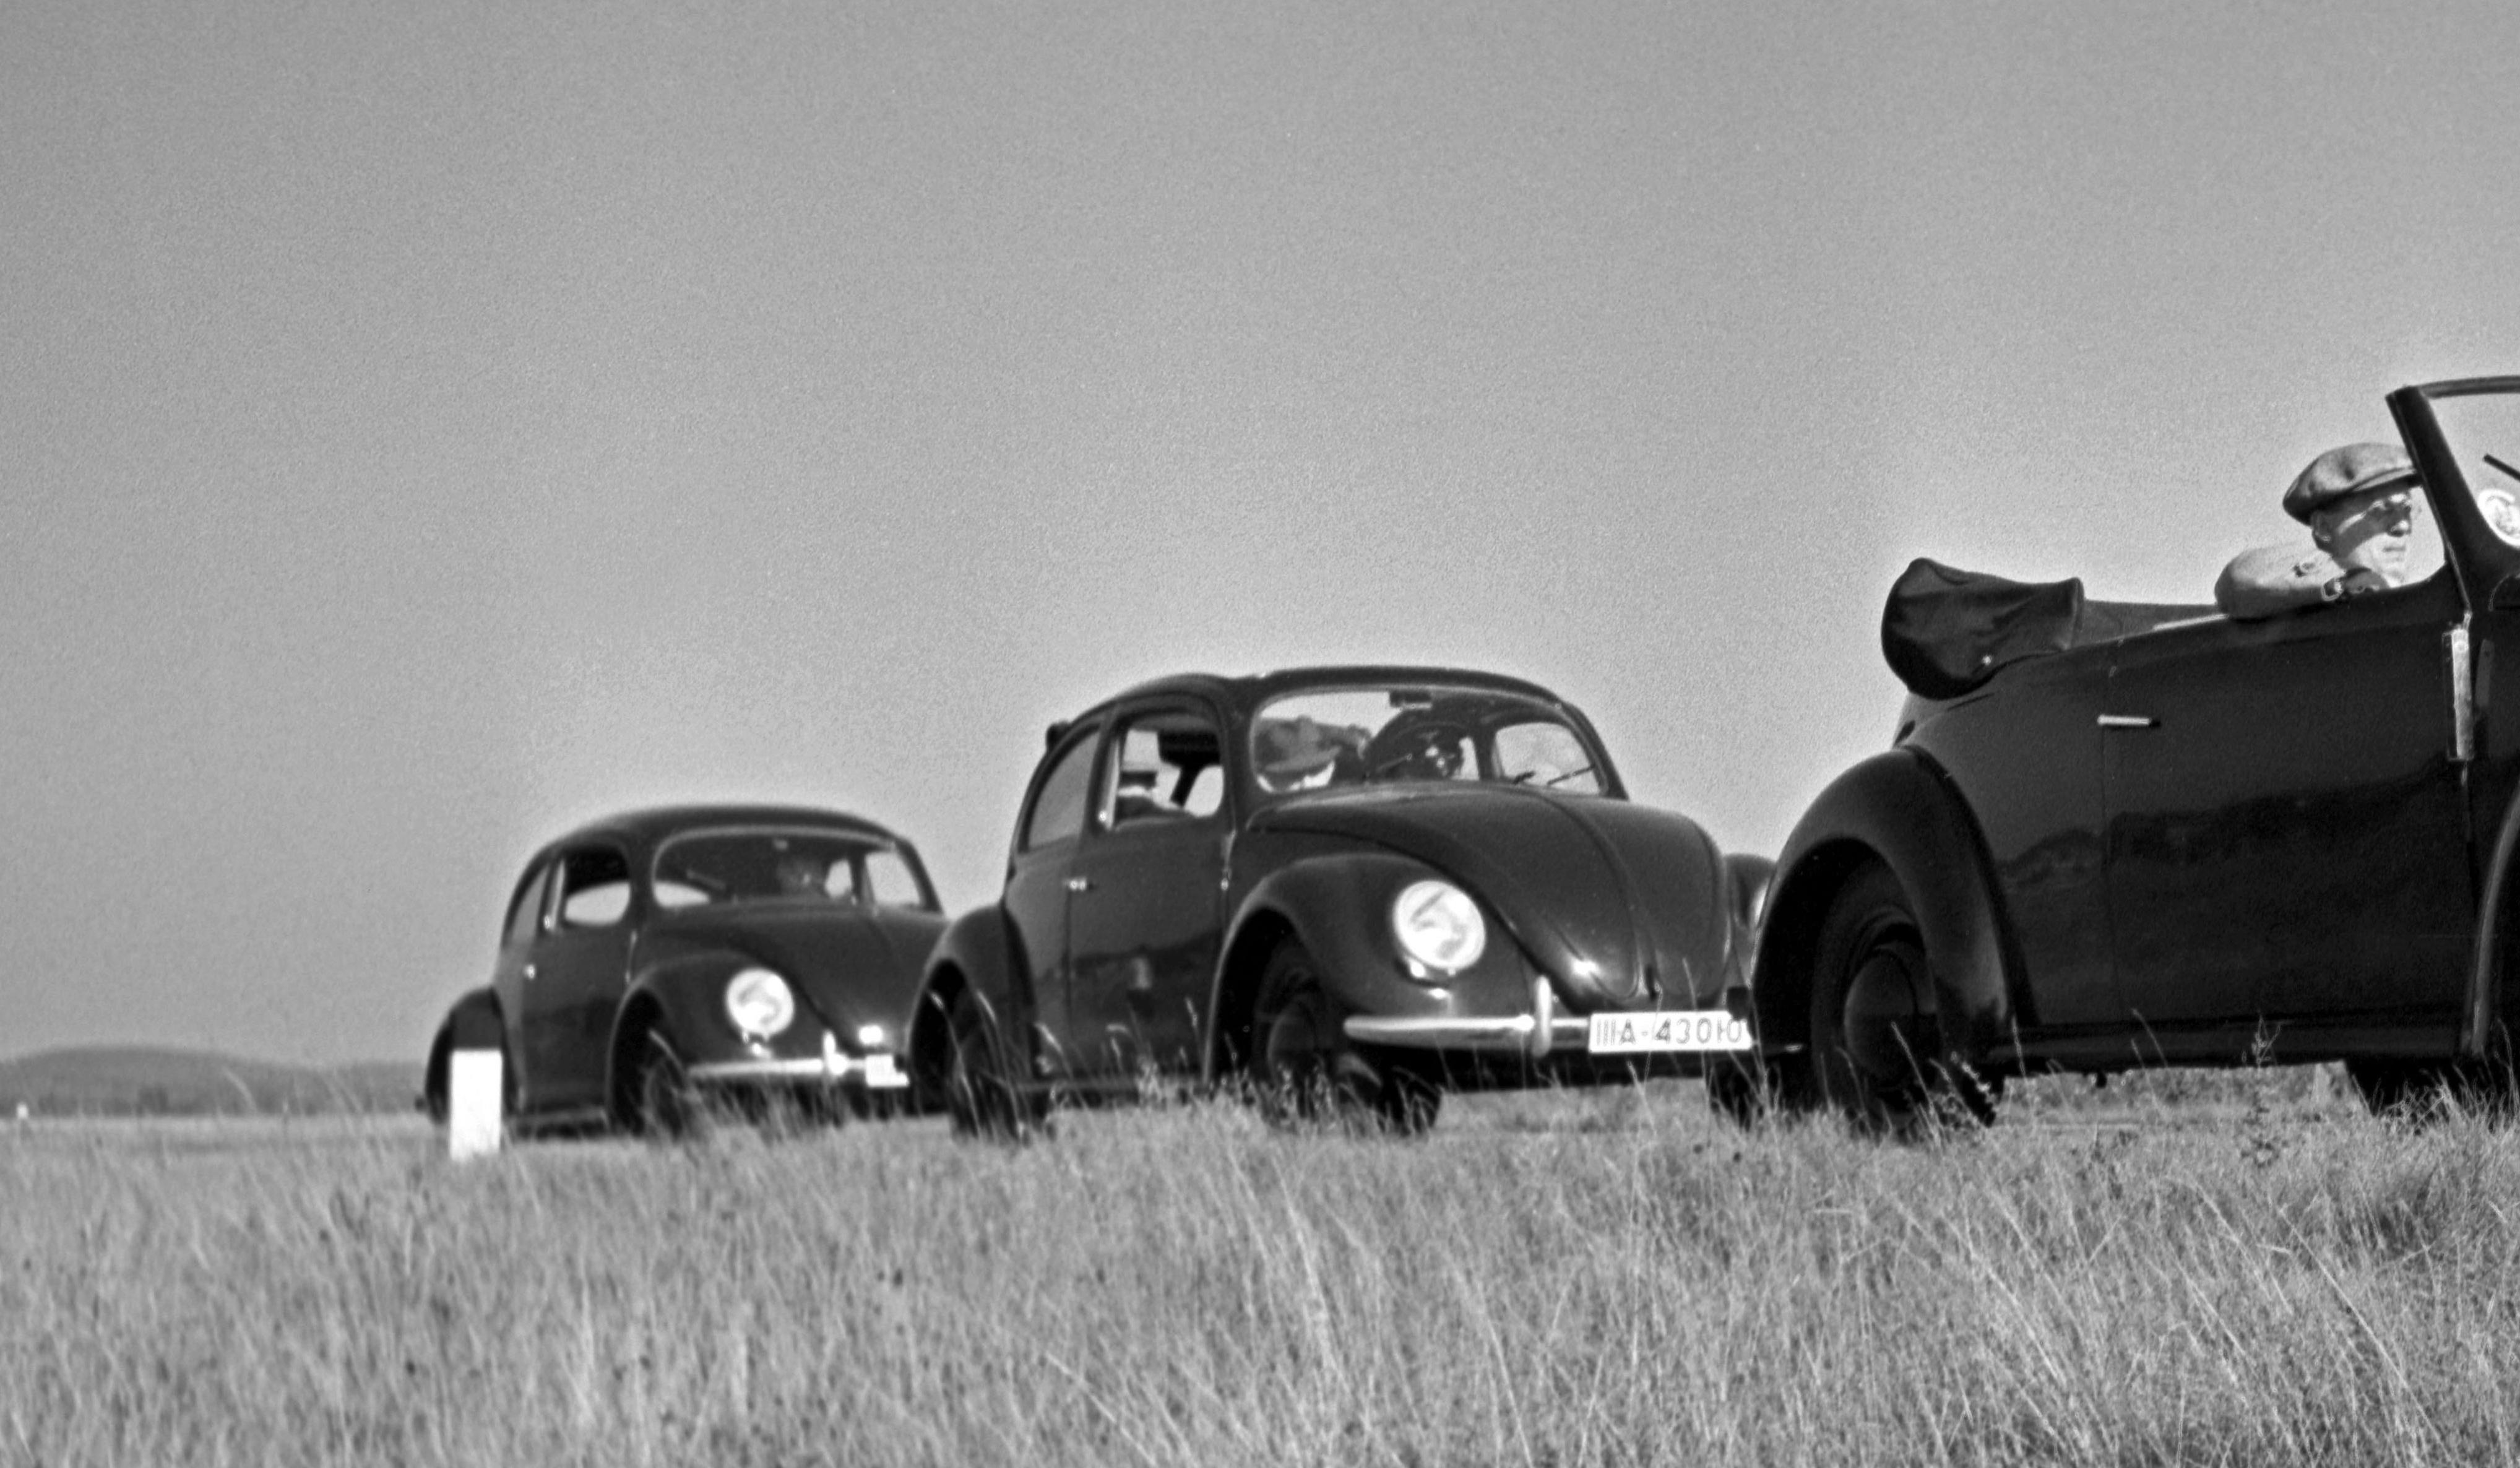 Three models of the Volkswagen beetle, Germany 1938 Printed Later  - Photograph by Henning Nolte